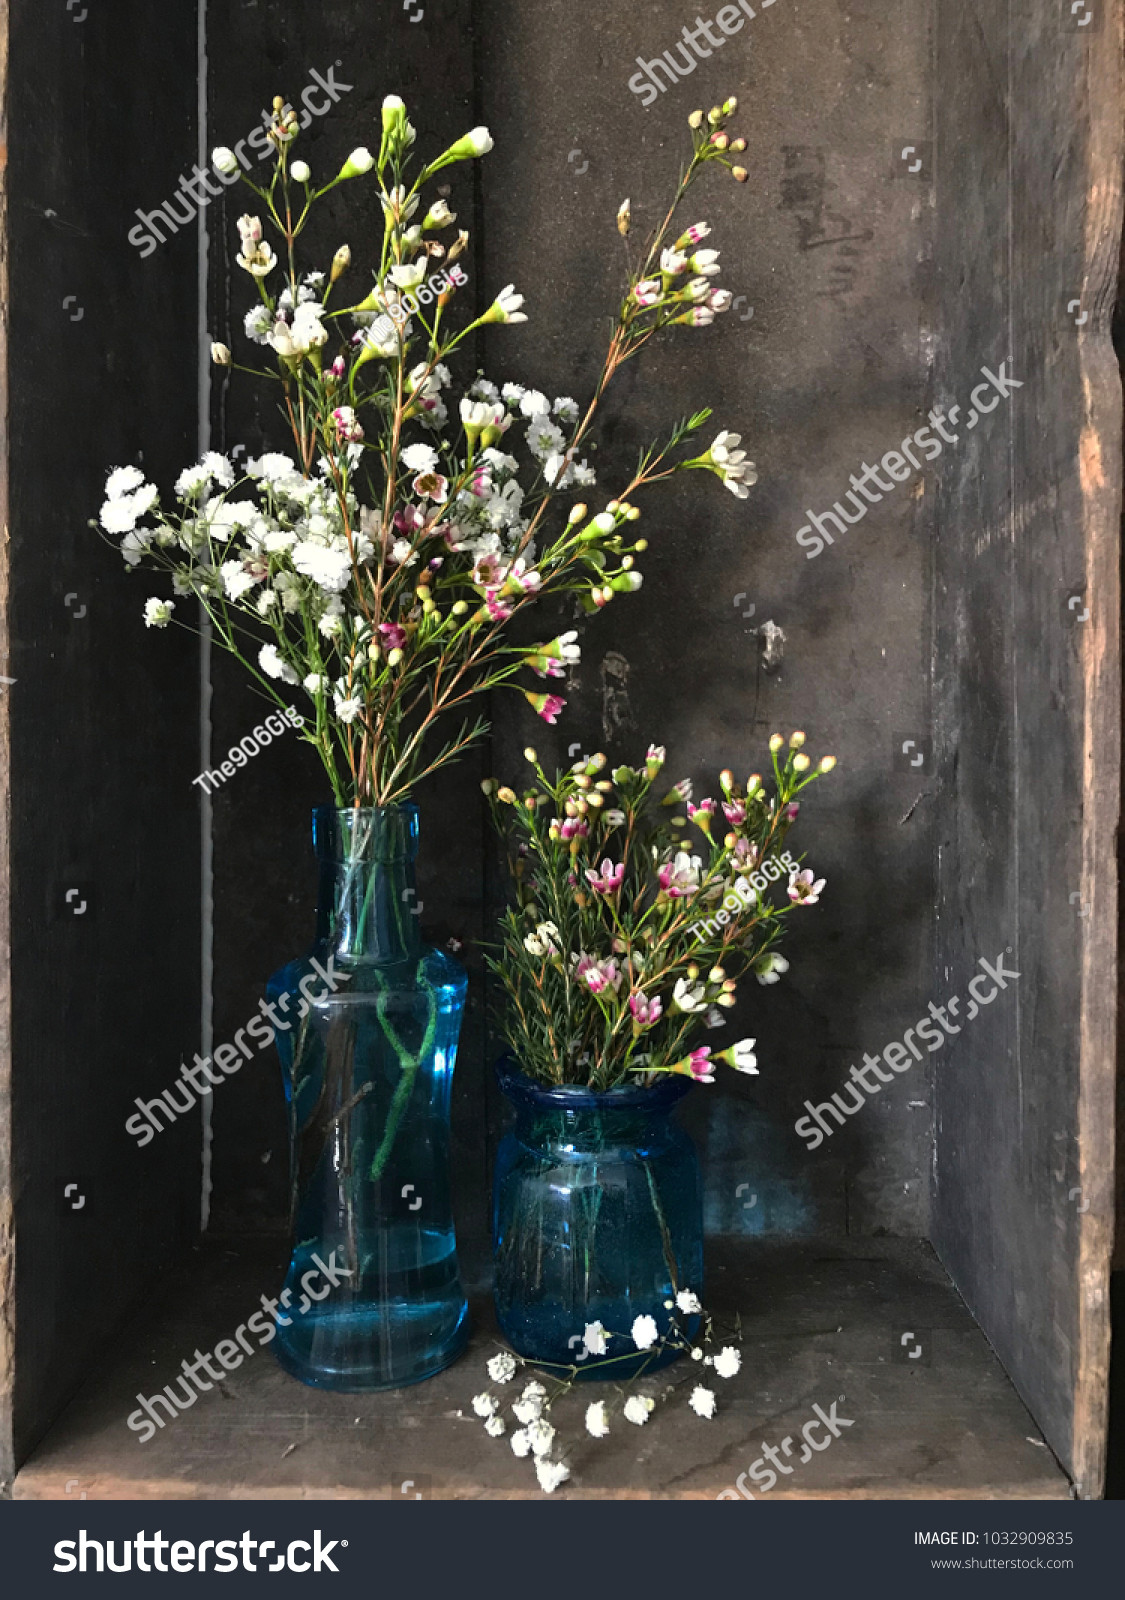 14 Awesome Flowers In Small Glass Vases 2024 free download flowers in small glass vases of wildflowers babys breath blue glass vases stock photo edit now with regard to wildflowers and babys breath in blue glass vases wood background rustic country 